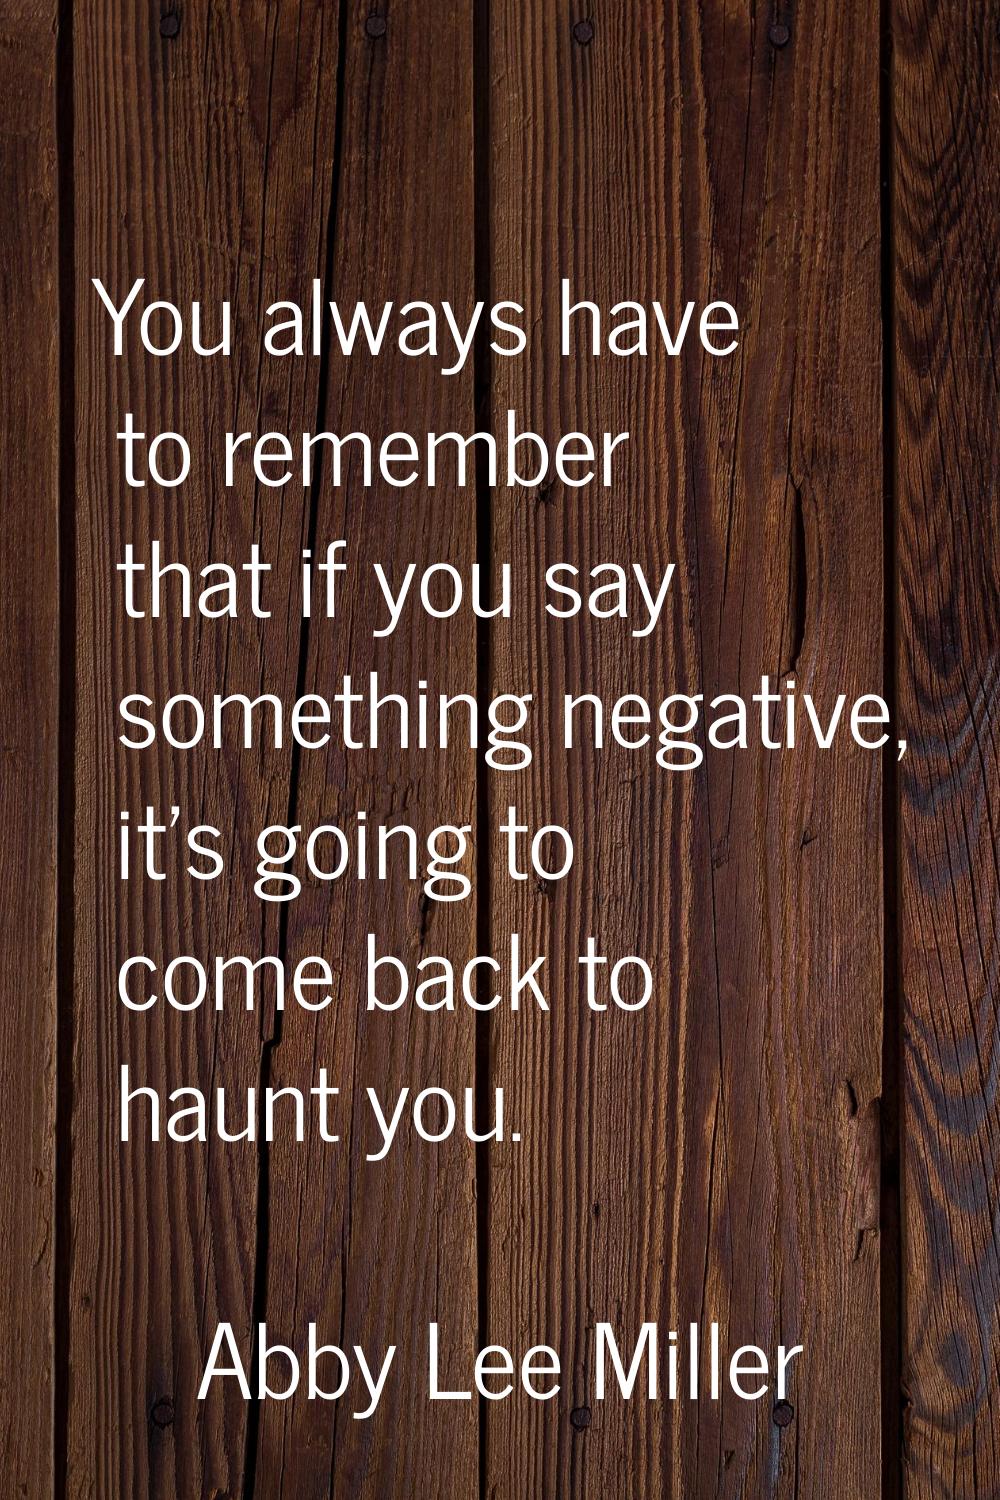 You always have to remember that if you say something negative, it's going to come back to haunt yo